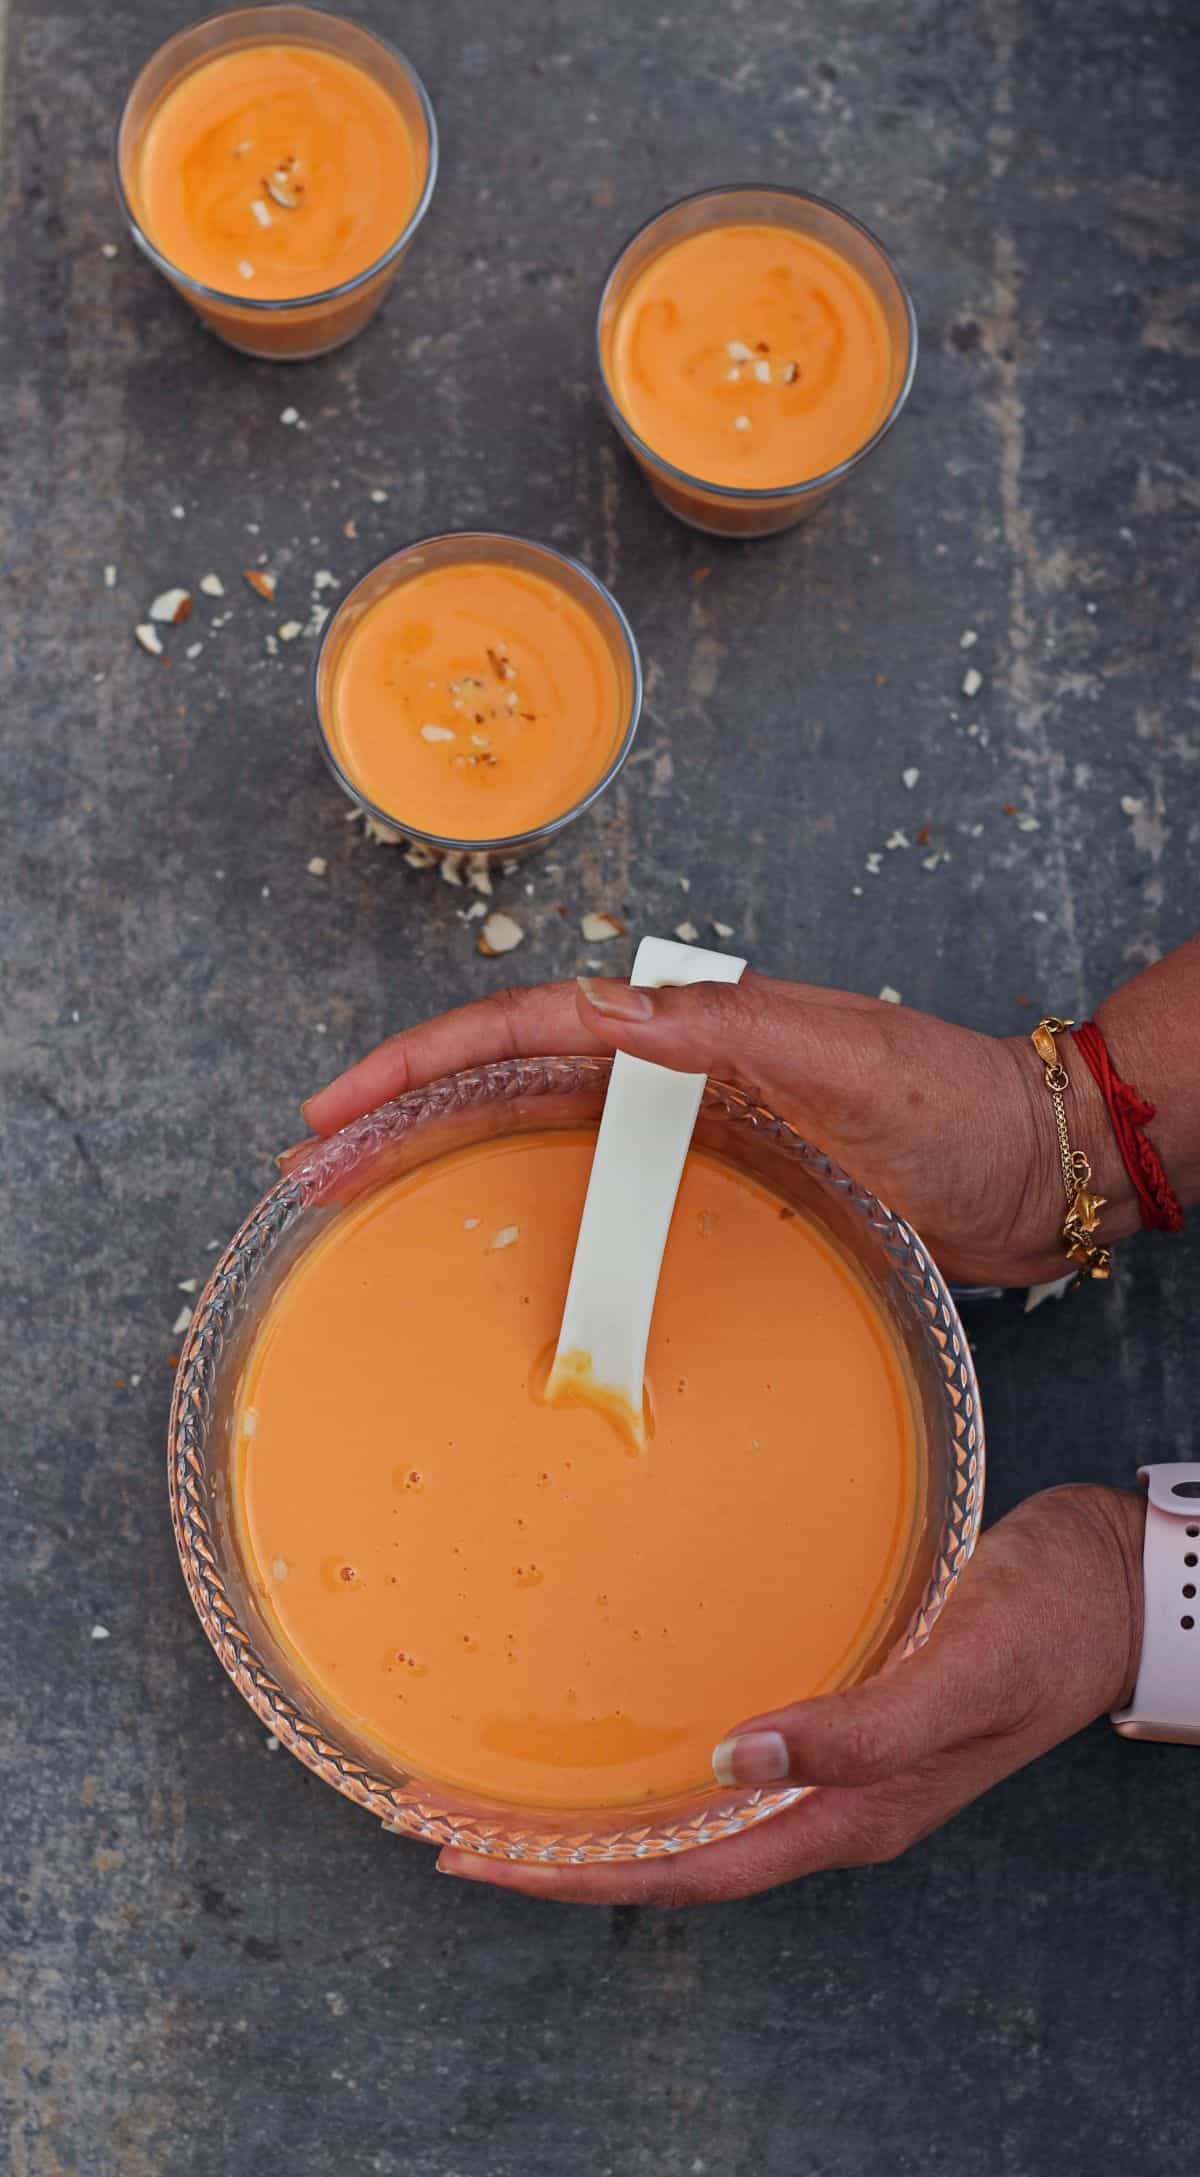 hands holding a bowl of carrot payasam and 3 glasses of kheer in the background.